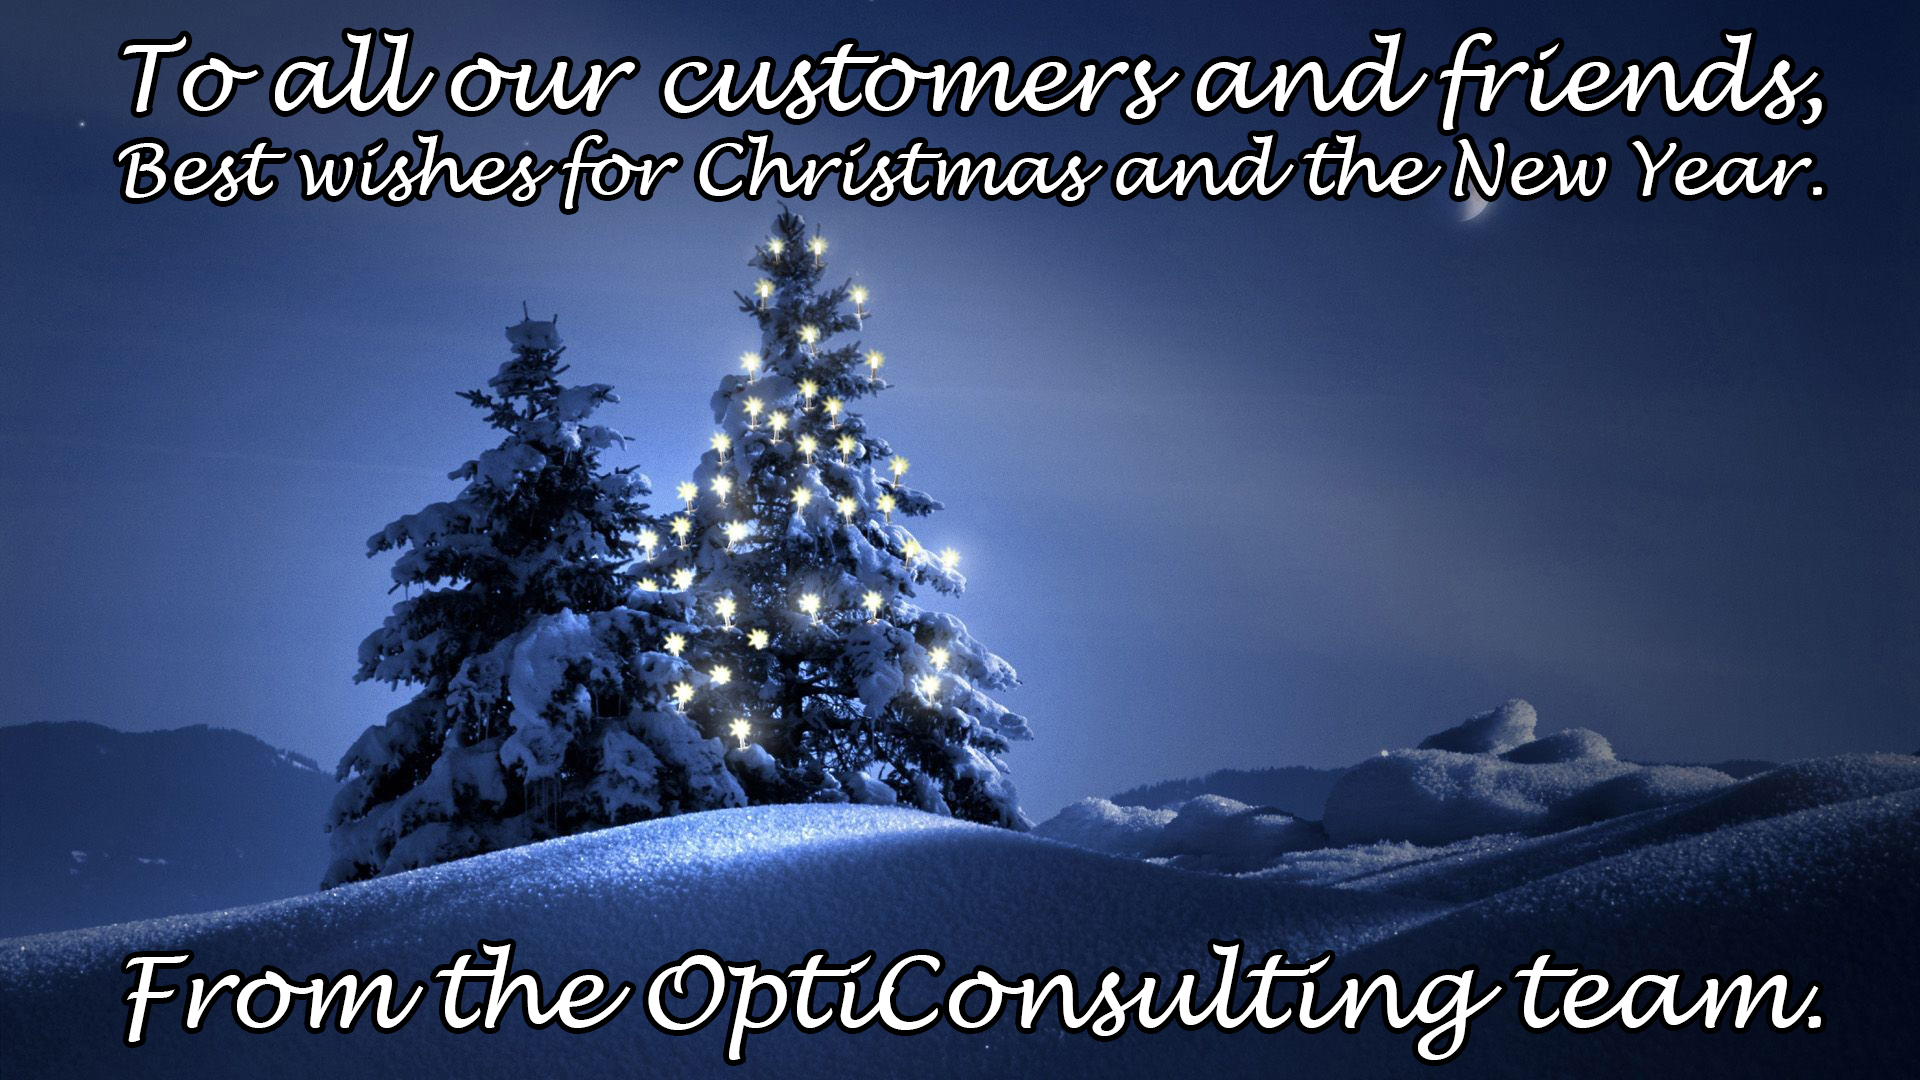 A snowy scene with a lit Christmas tree with a message to our customers